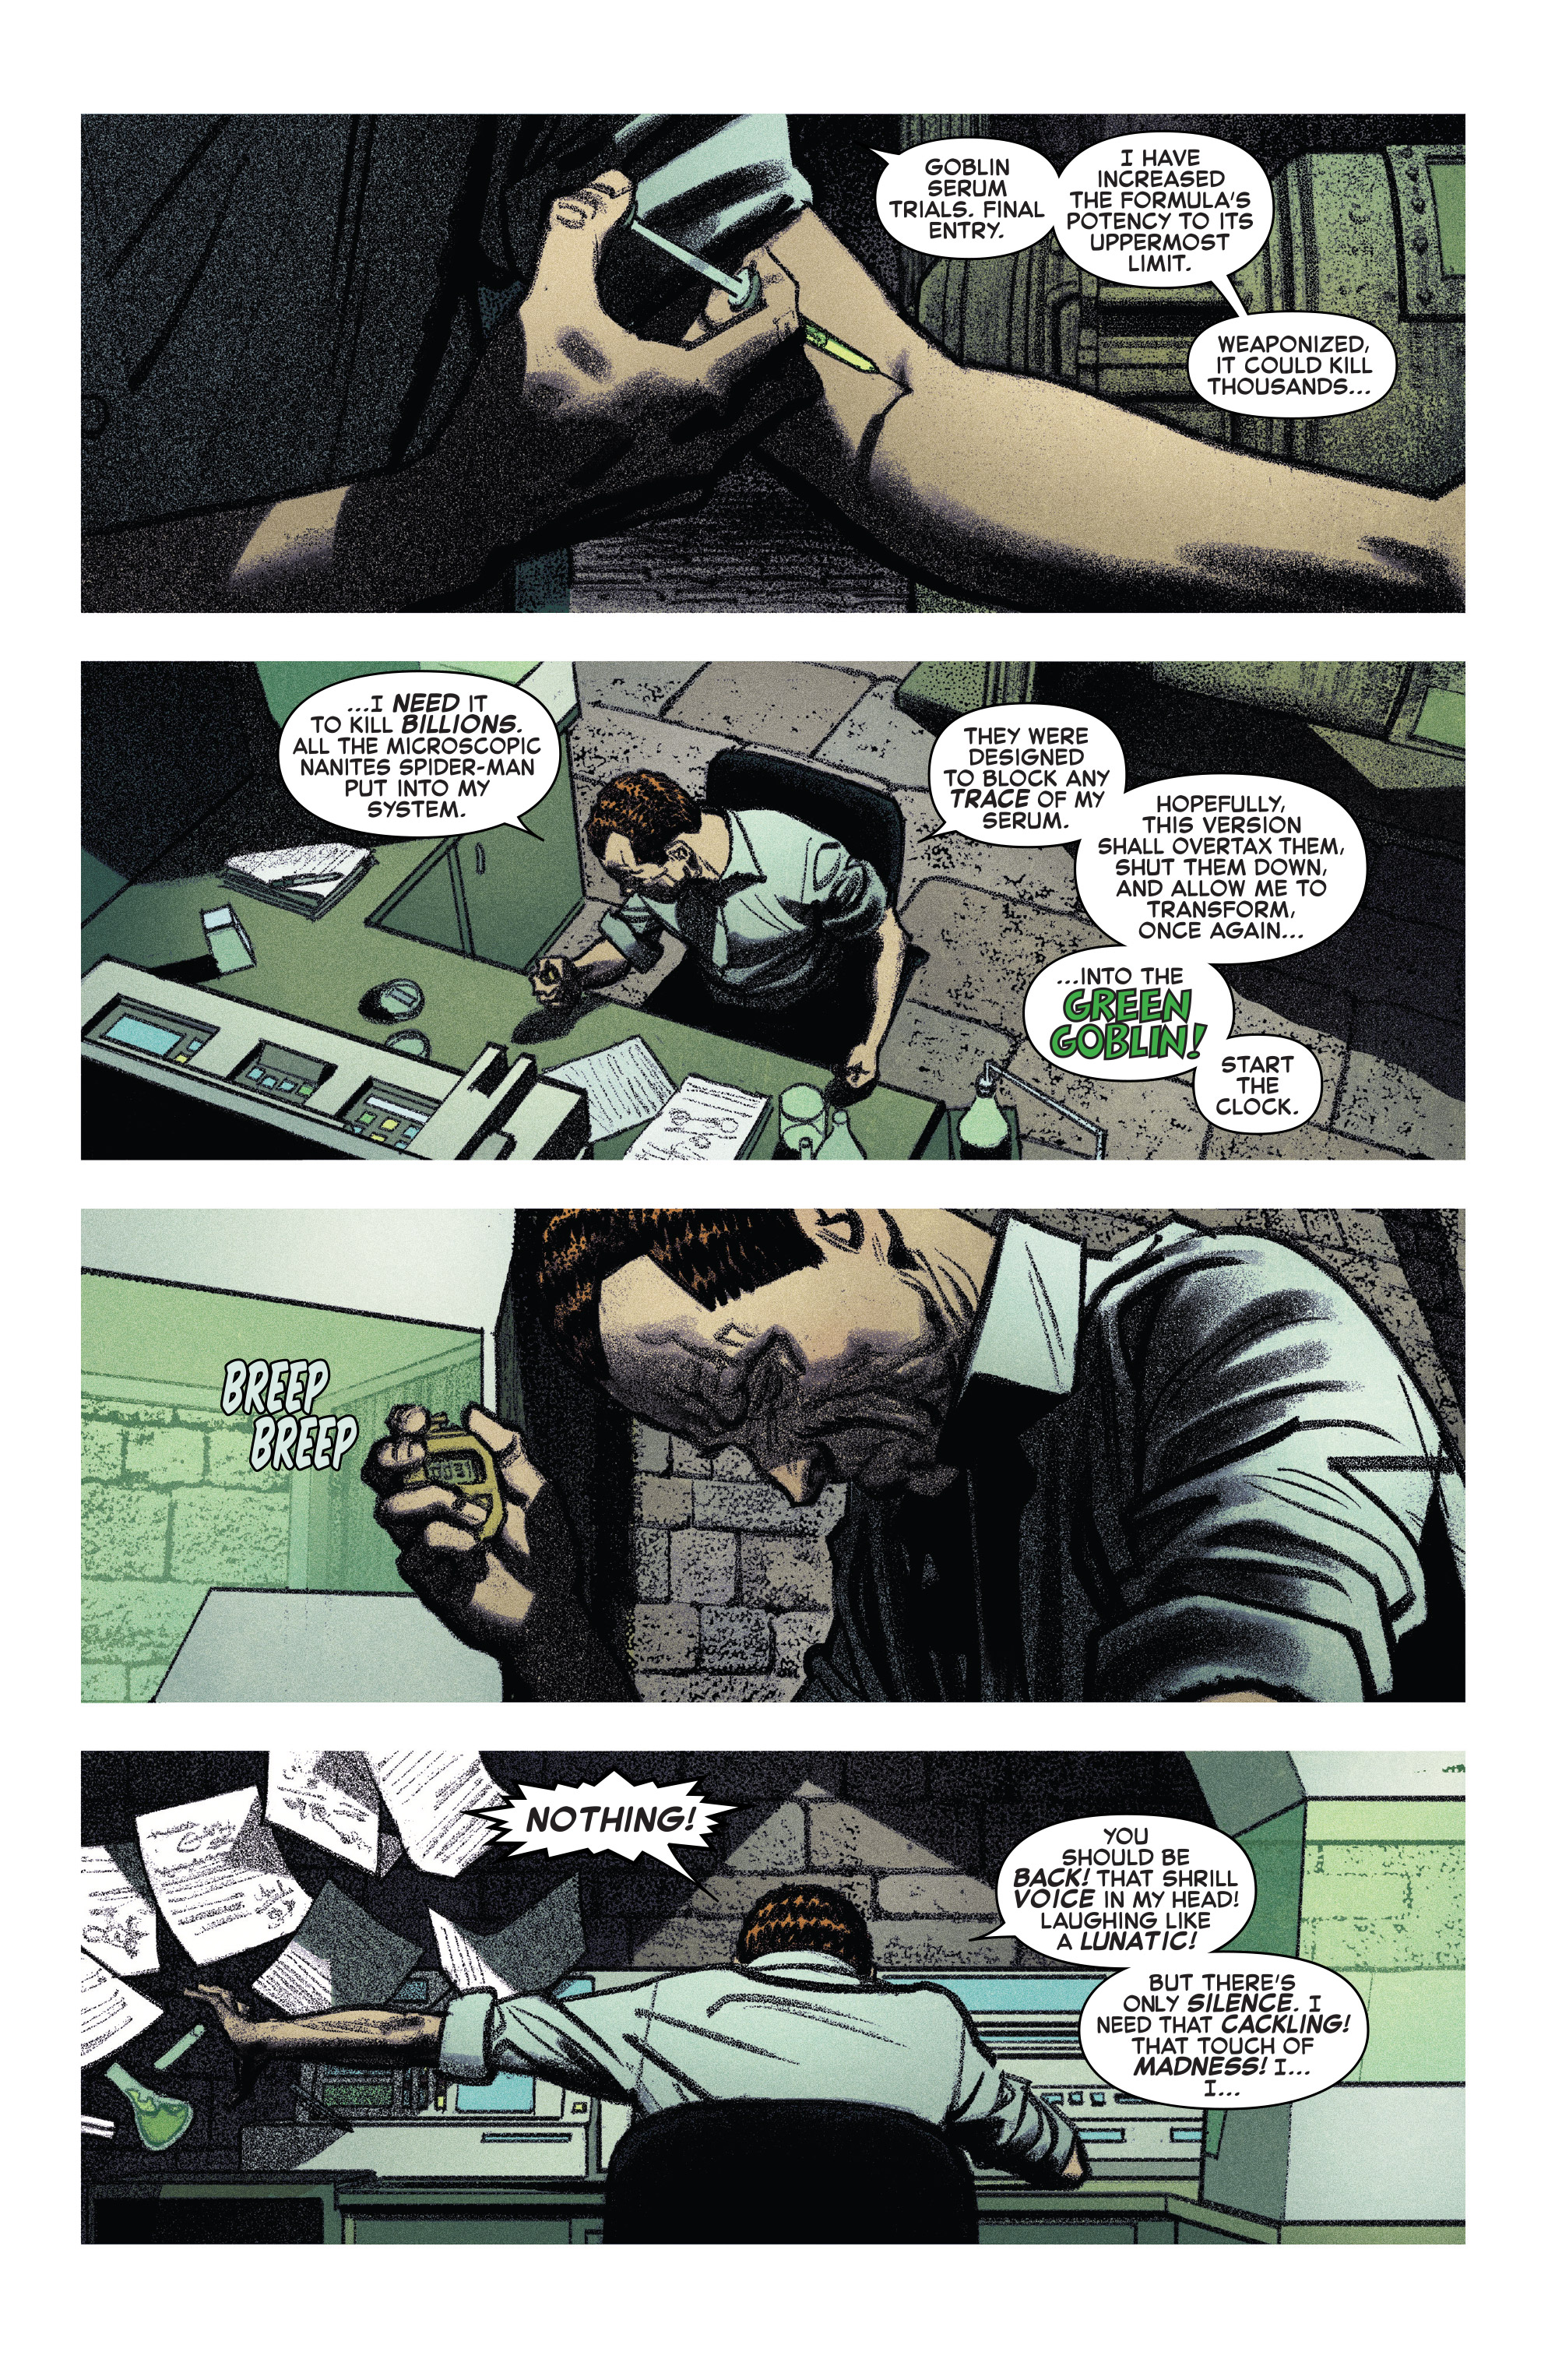 The Amazing Spider-Man (2015-): Chapter 32 - Page 3